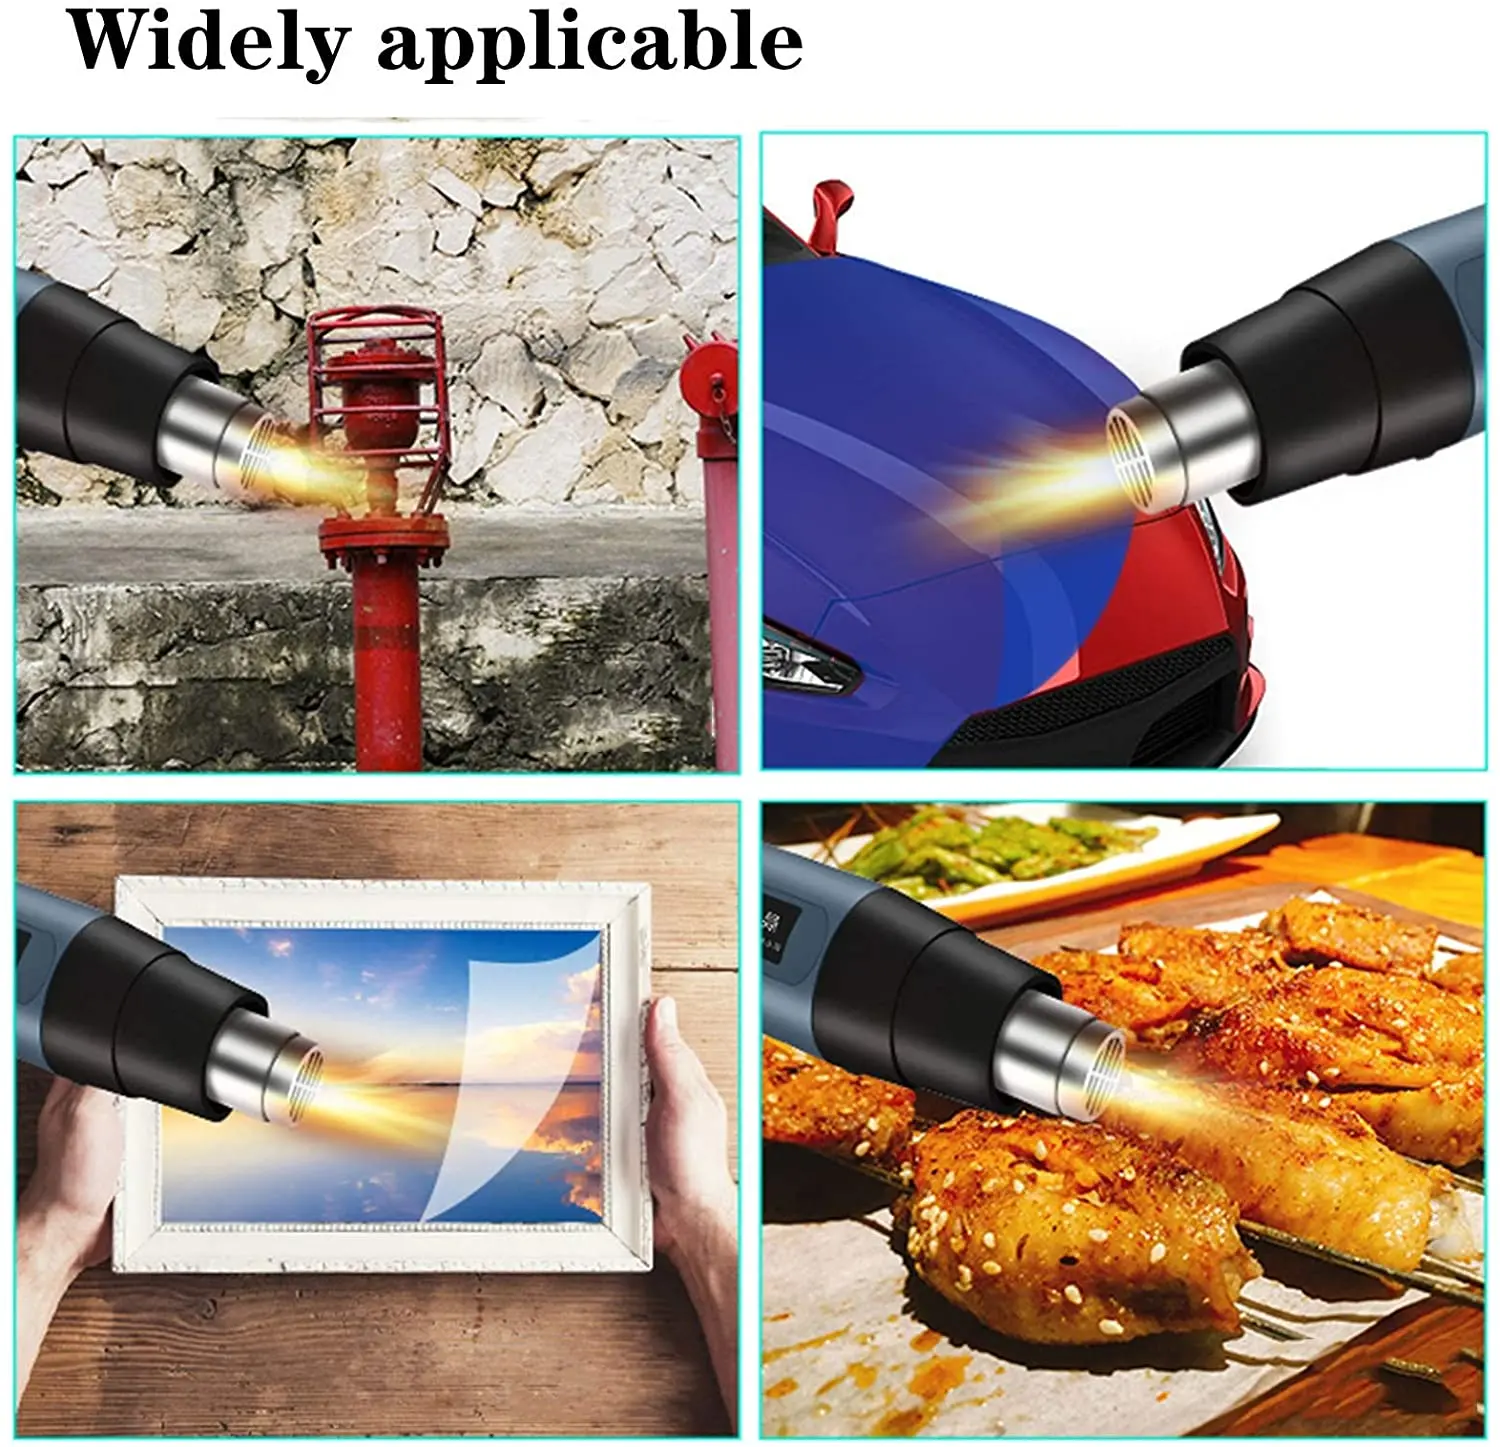 2000W LCD/NO LCD Heat Gun Variable Temperature Advanced Electric Hot Air Gun Power Tool Hair dryer for soldering Thermoregulator electric screwdriver kit